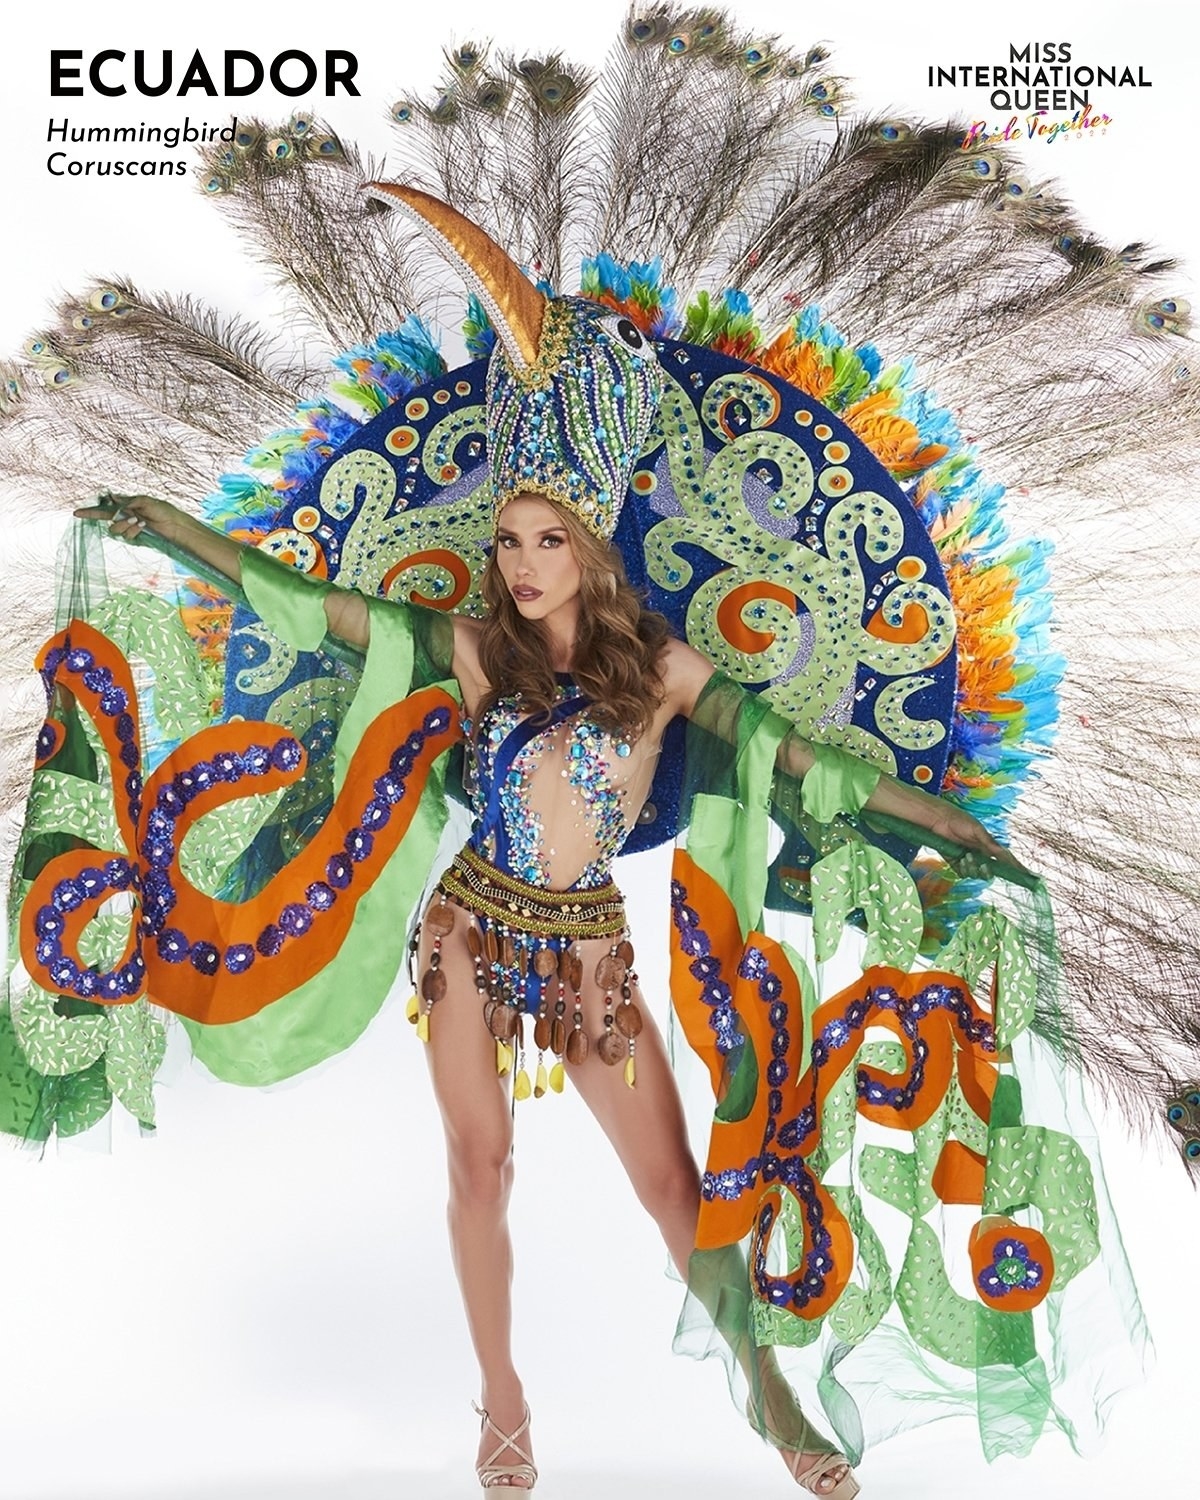 Miss Ecuador in an outfit with a bird headpiece and feathers